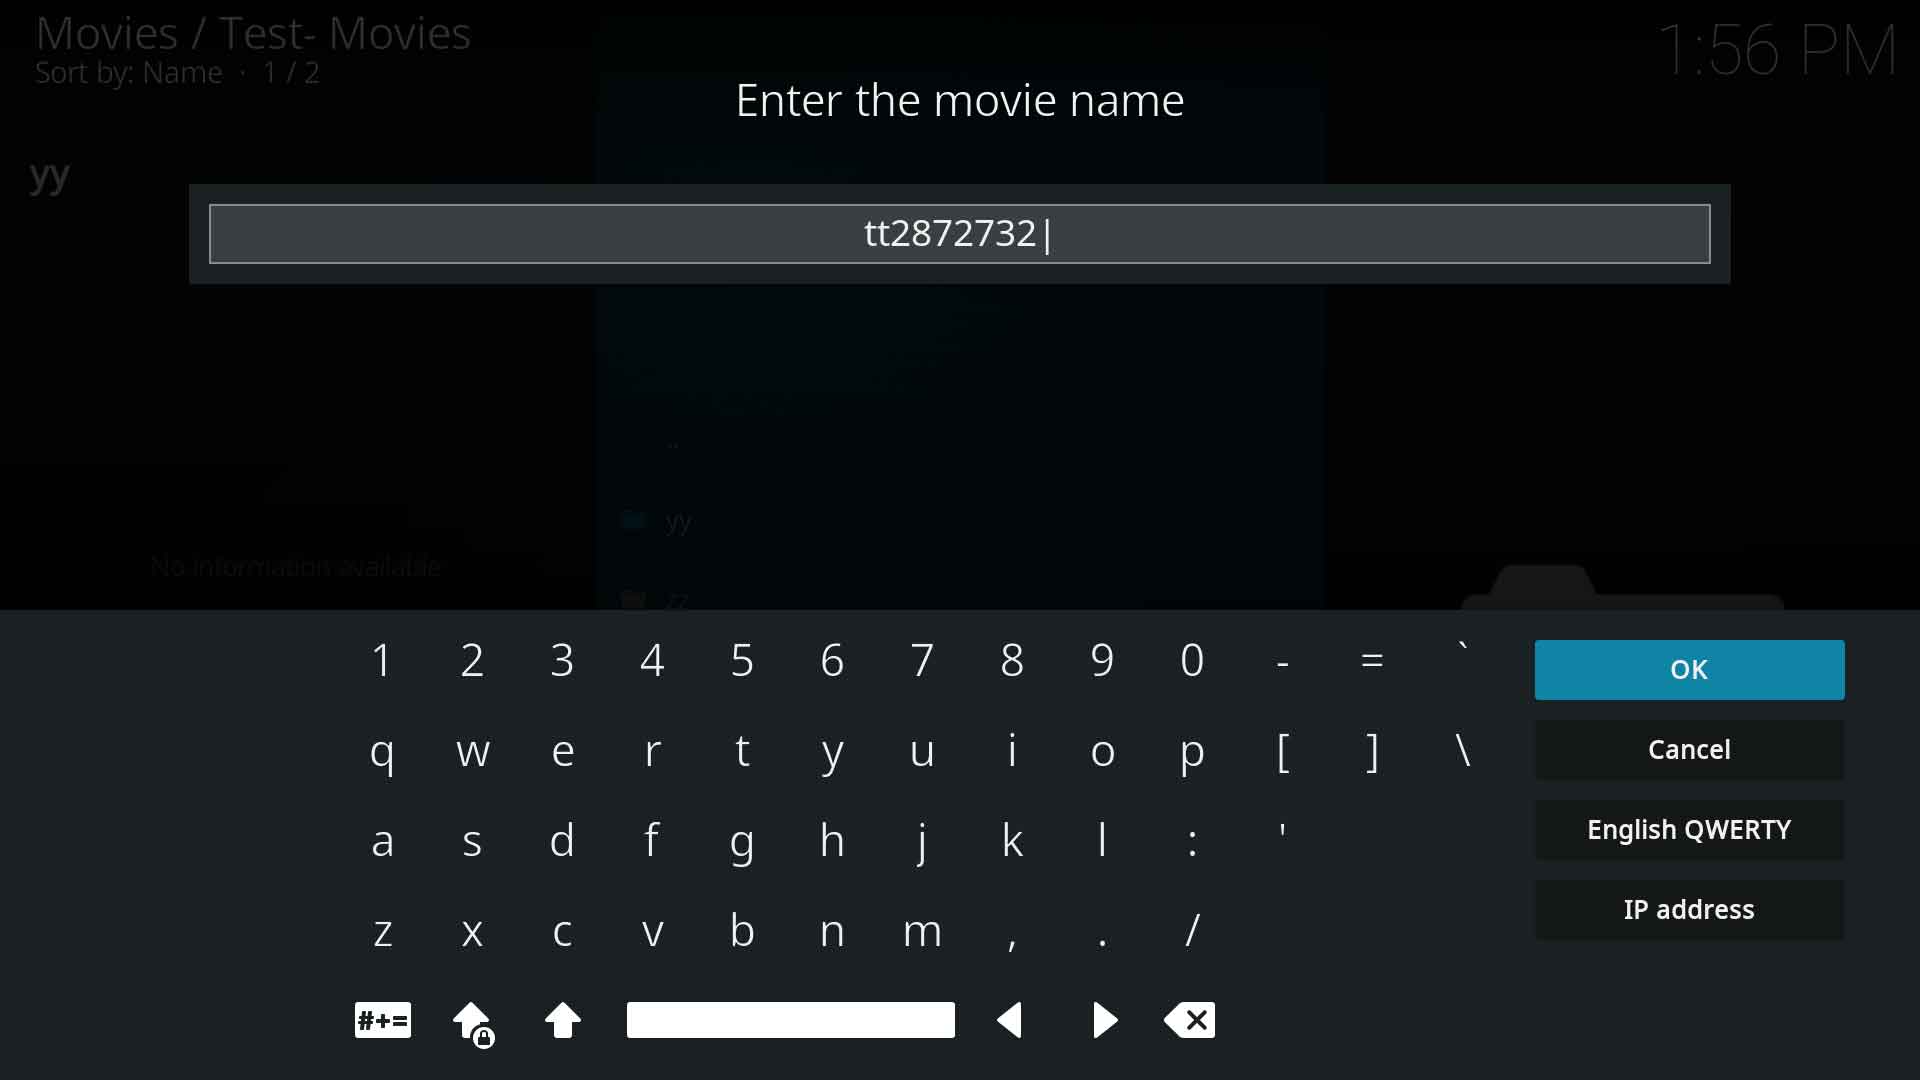 Image 2- If using the IMDB ID, enter it as shown then select OK